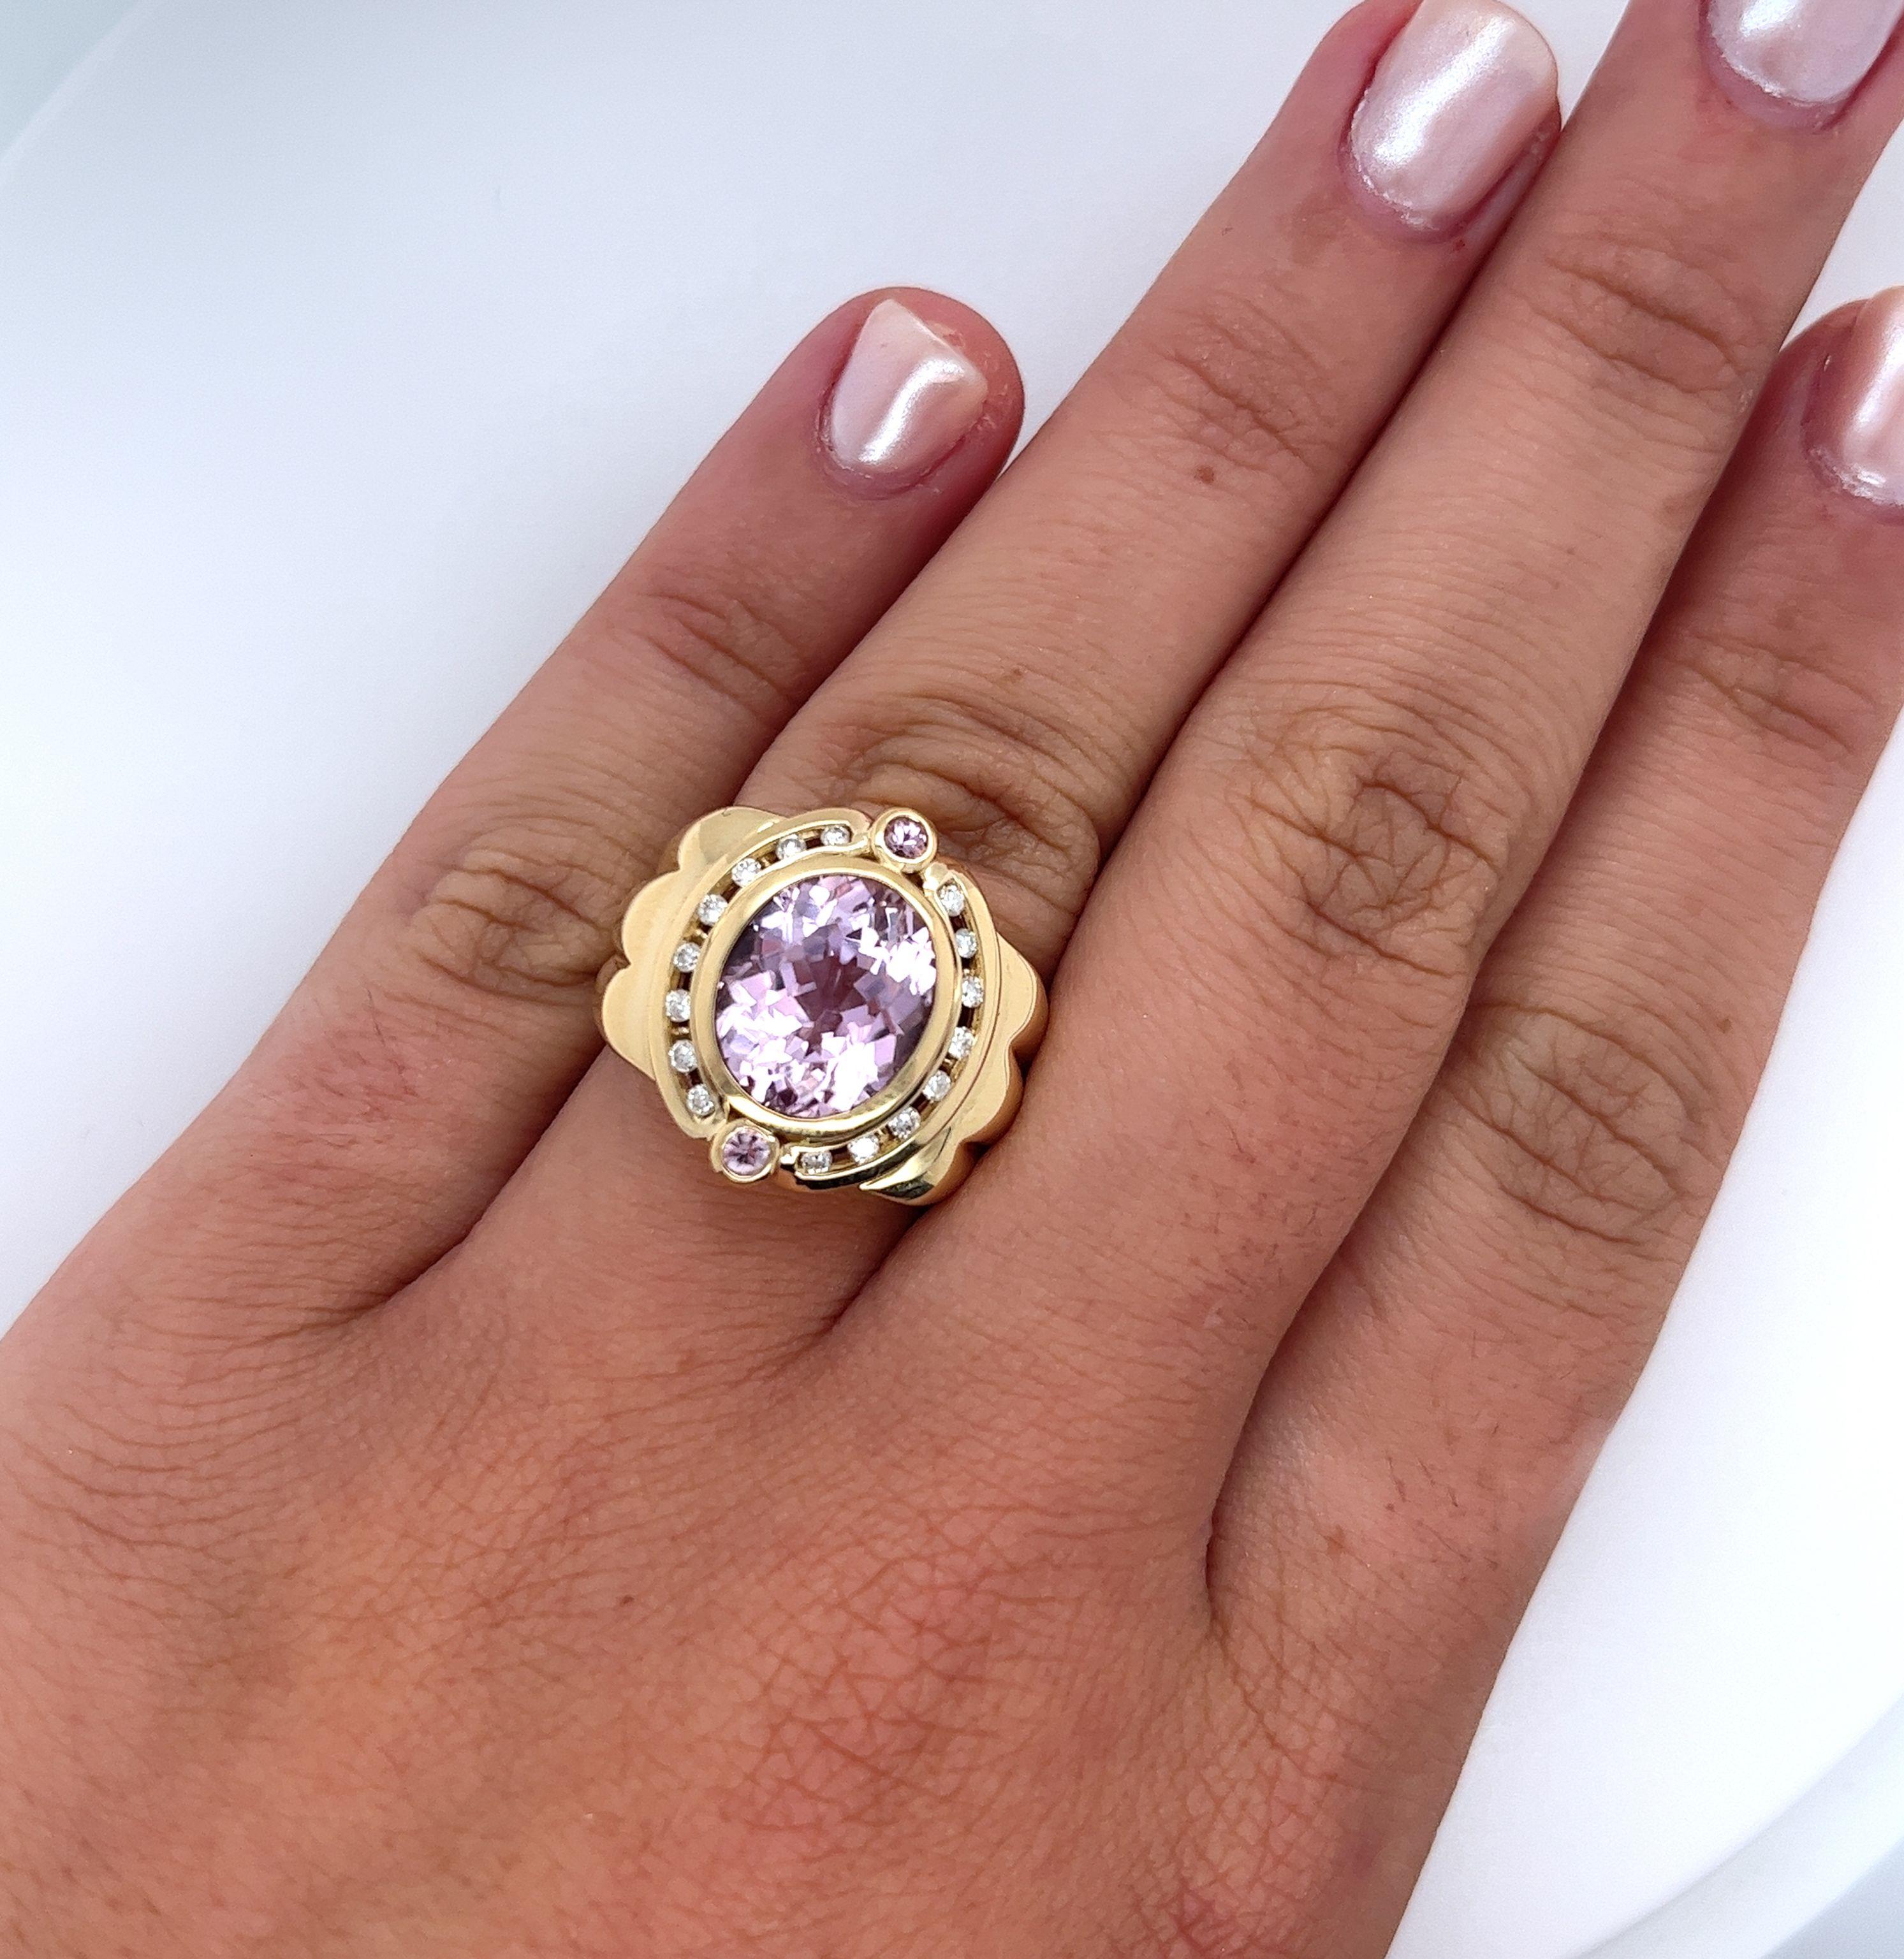 Vintage 6.50 Carat Oval Cut Pink Kunzite and Diamond Ring. Fashioned in 18K Yellow Gold, this semi-precious gem is a tribute to the past, weighing 17.1 grams and offering a regal/retro look. Its intricate setting combines the beauty of channel and